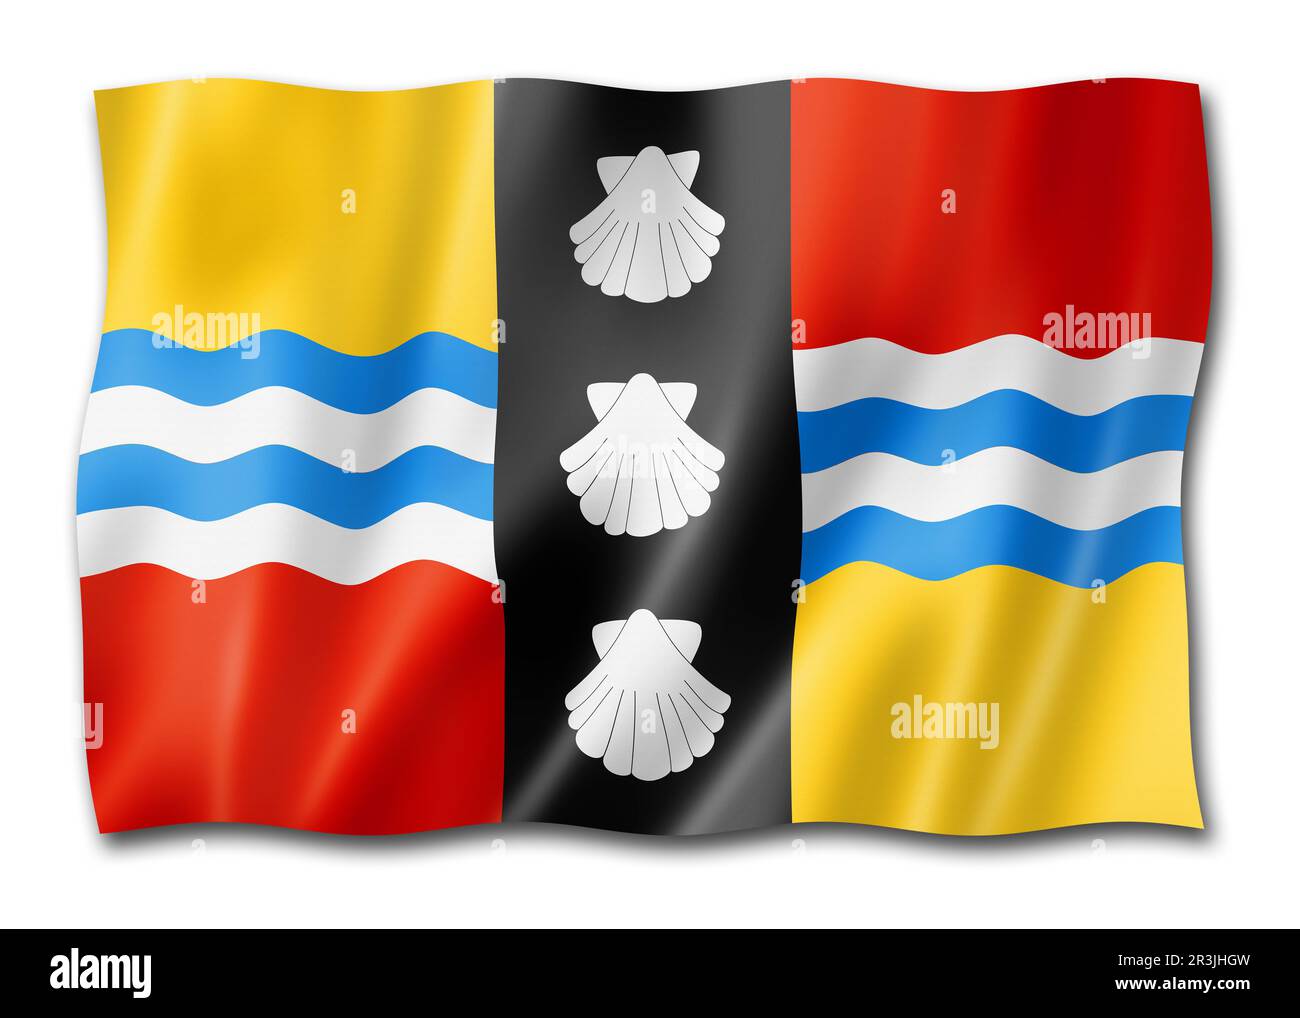 Bedfordshire County Flag, Royaume-Uni waving banner collection. Illustration tridimensionnelle Banque D'Images